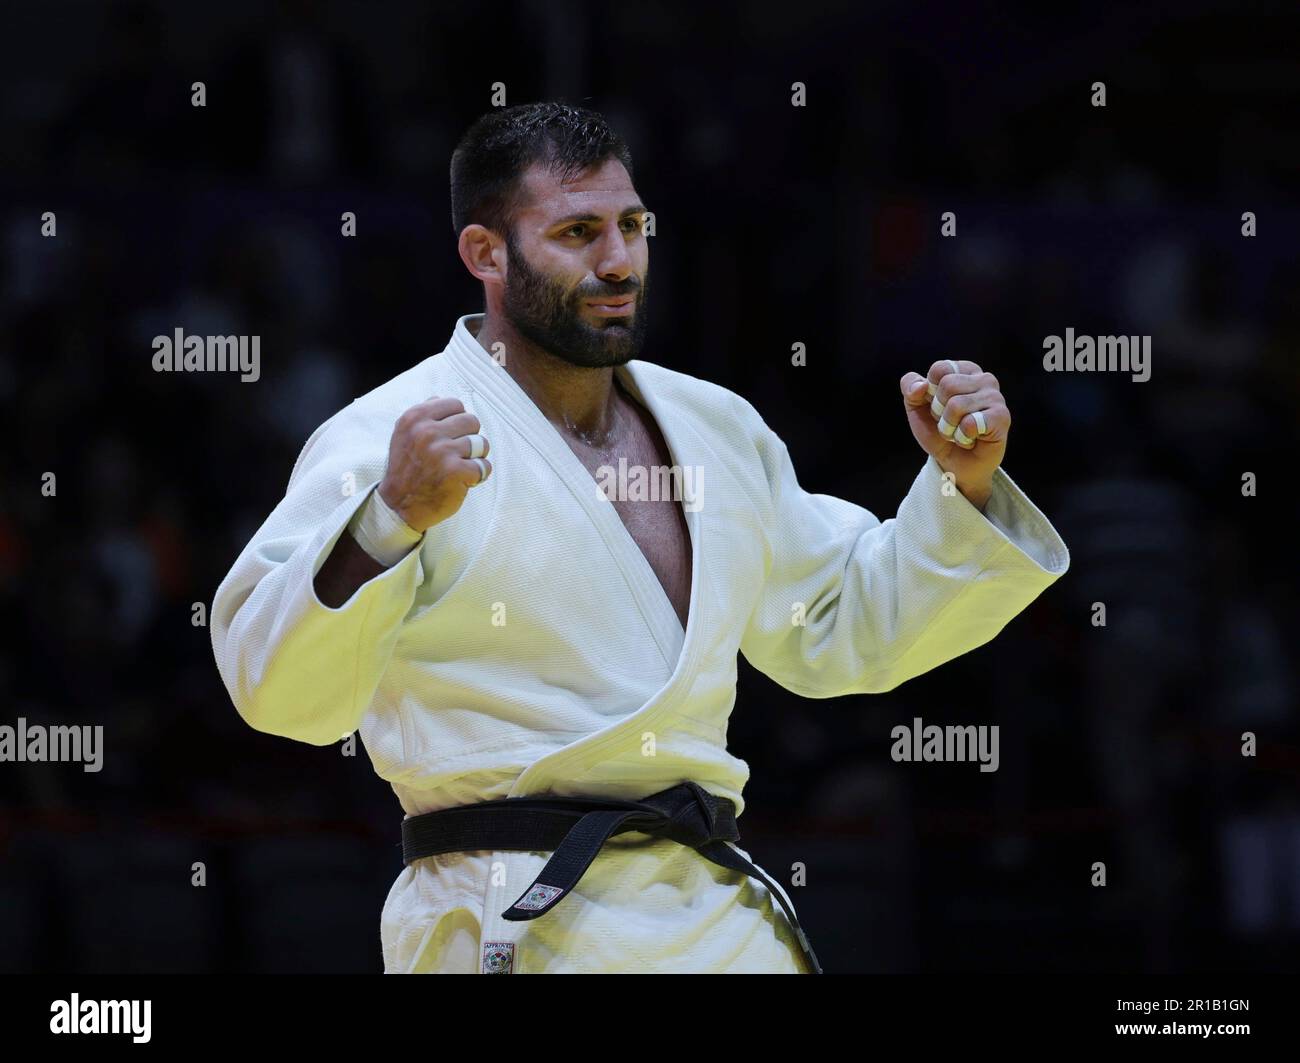 Czechs Lukas KRPALEK (blue) and Arman ADAMIAN (white) compete during the final of Men(male)-100 kg g at World Judo Championships in Doha, Qatar on May 12, 2023